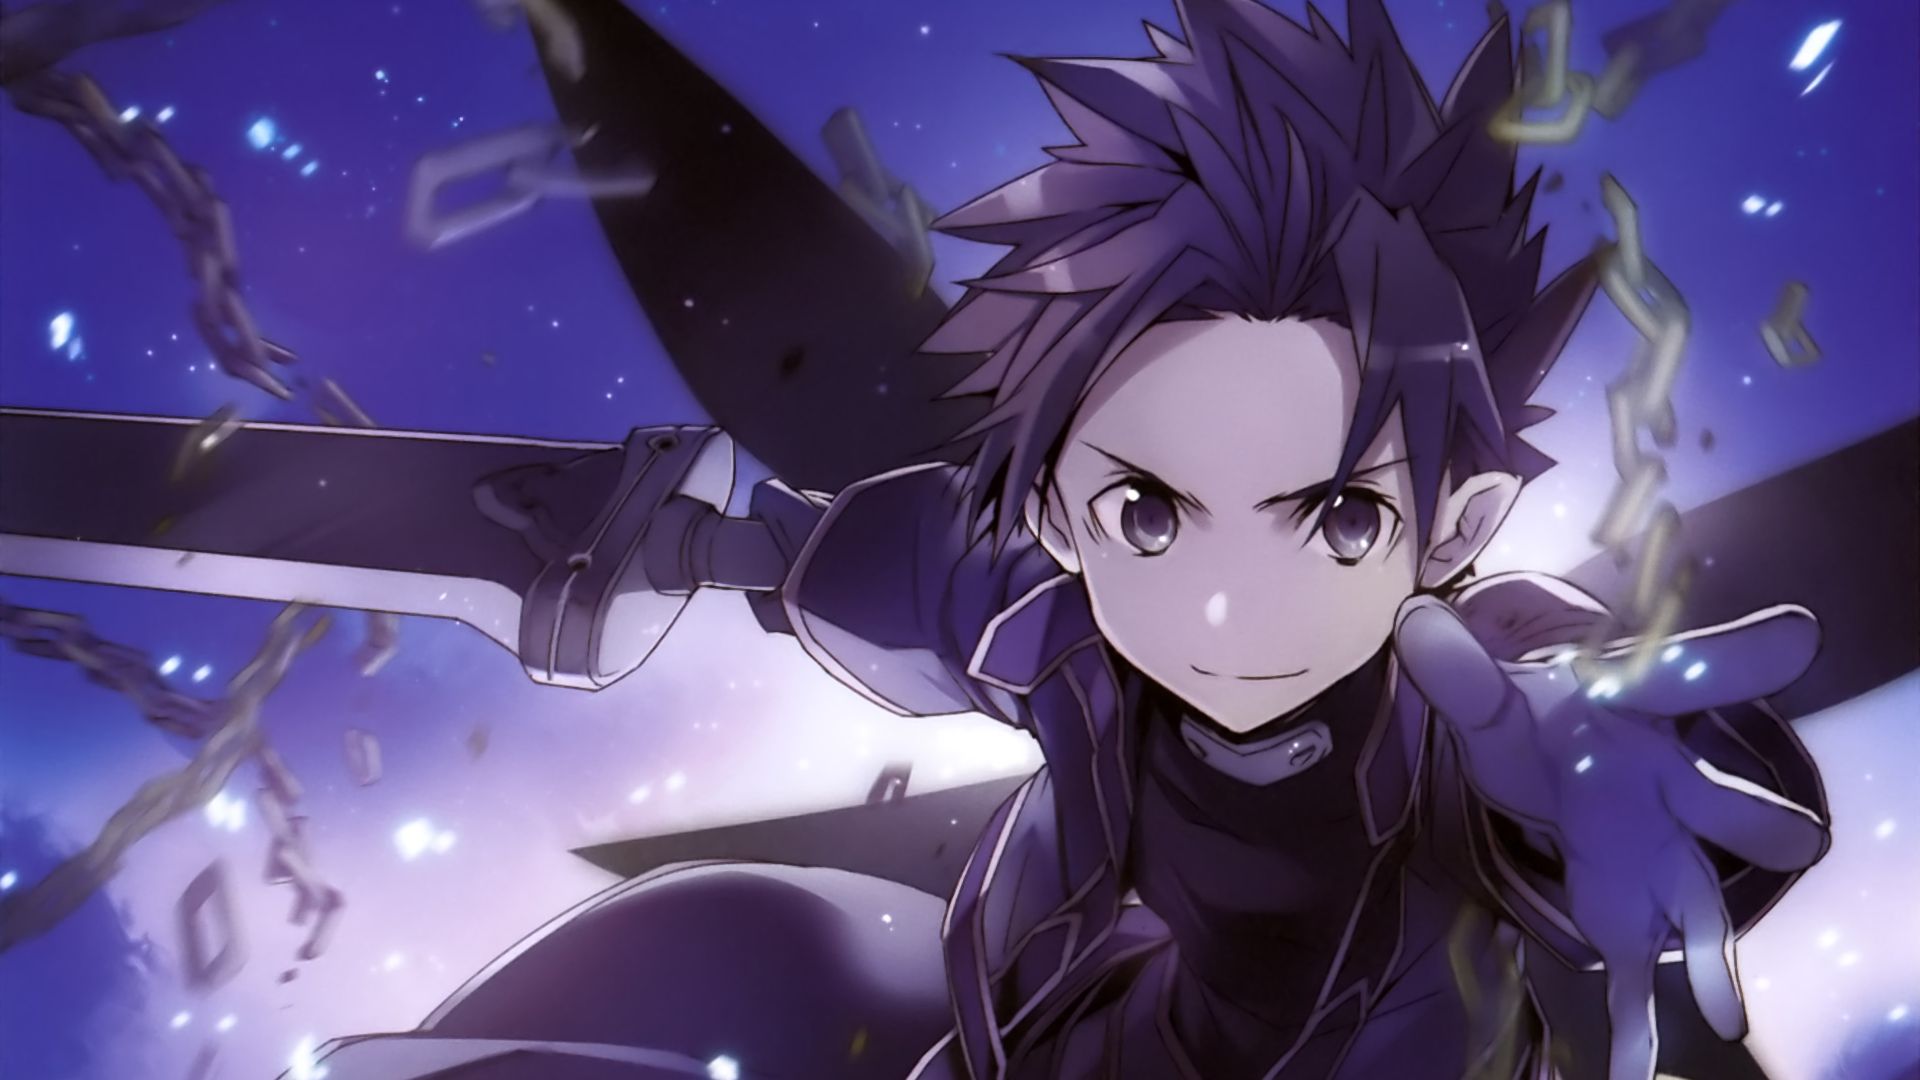 1400 Kirito Sword Art Online HD Wallpapers and Backgrounds